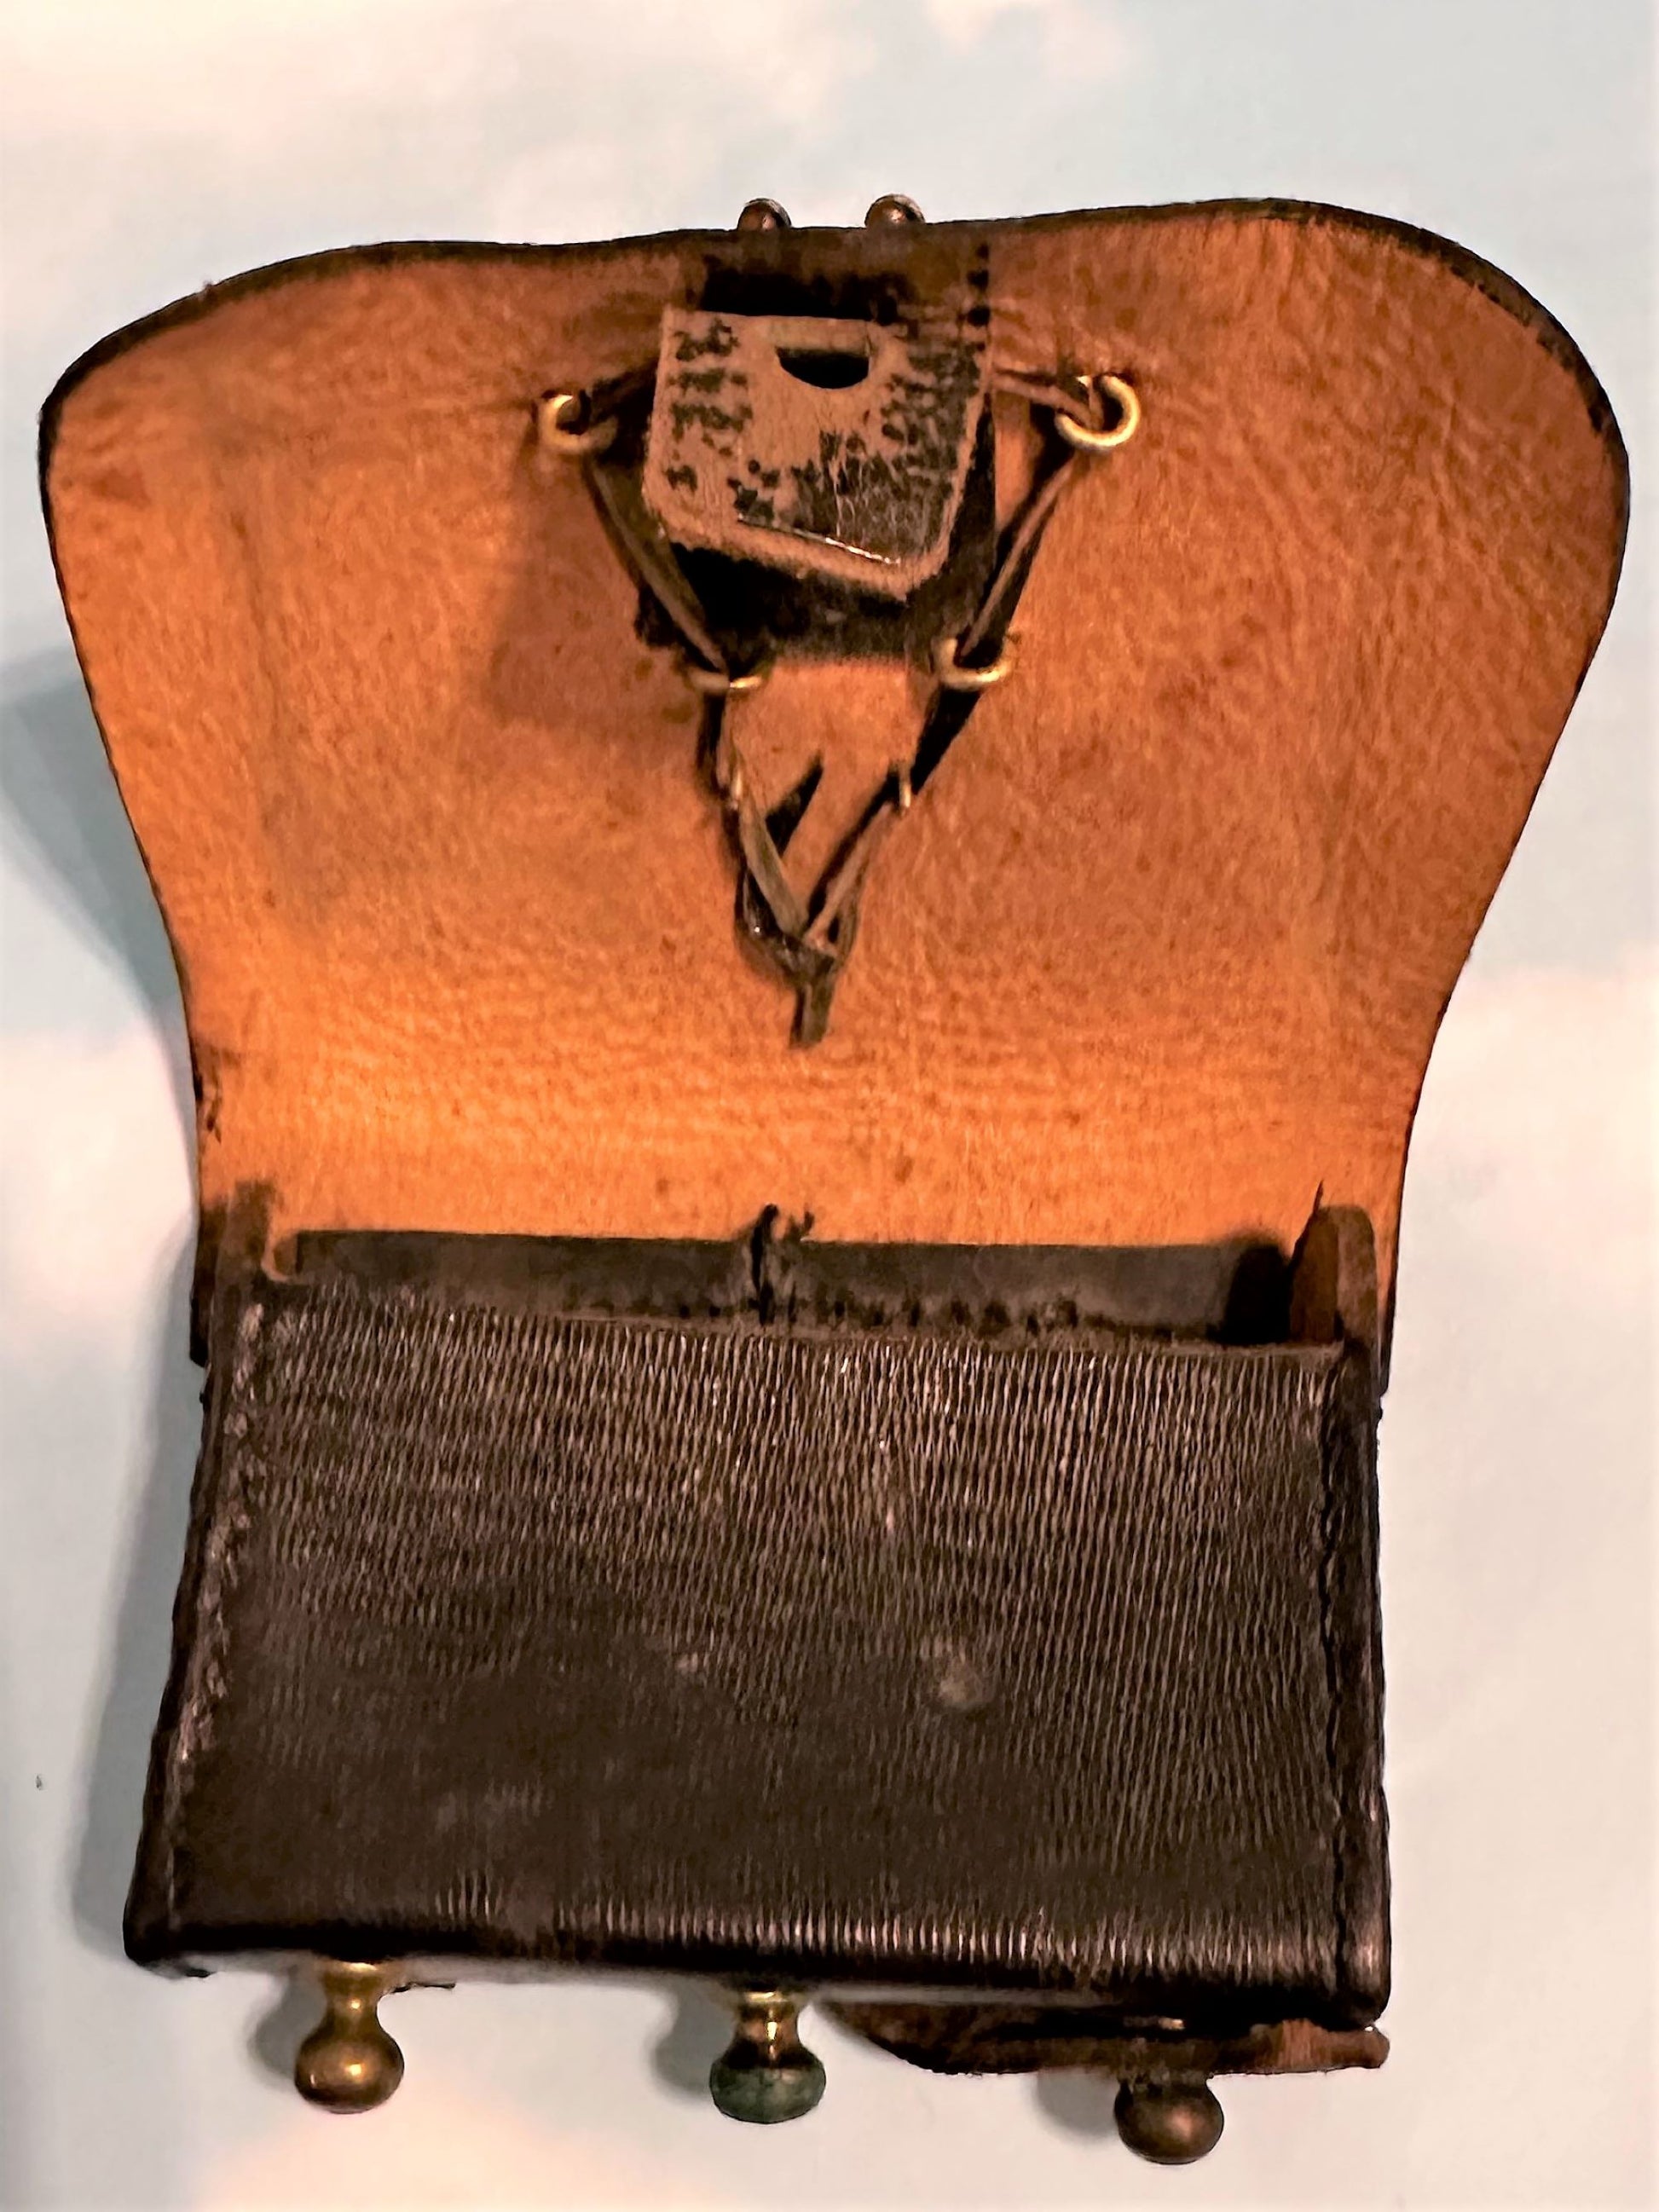 Prussian leather belt and cartridge box once worn by officers of the prestigious 1. Leib-Husaren-Regiment Nr 1 and 2. Leib-Husaren-Regiment Nr 2 - Derrittmeister Militaria Group